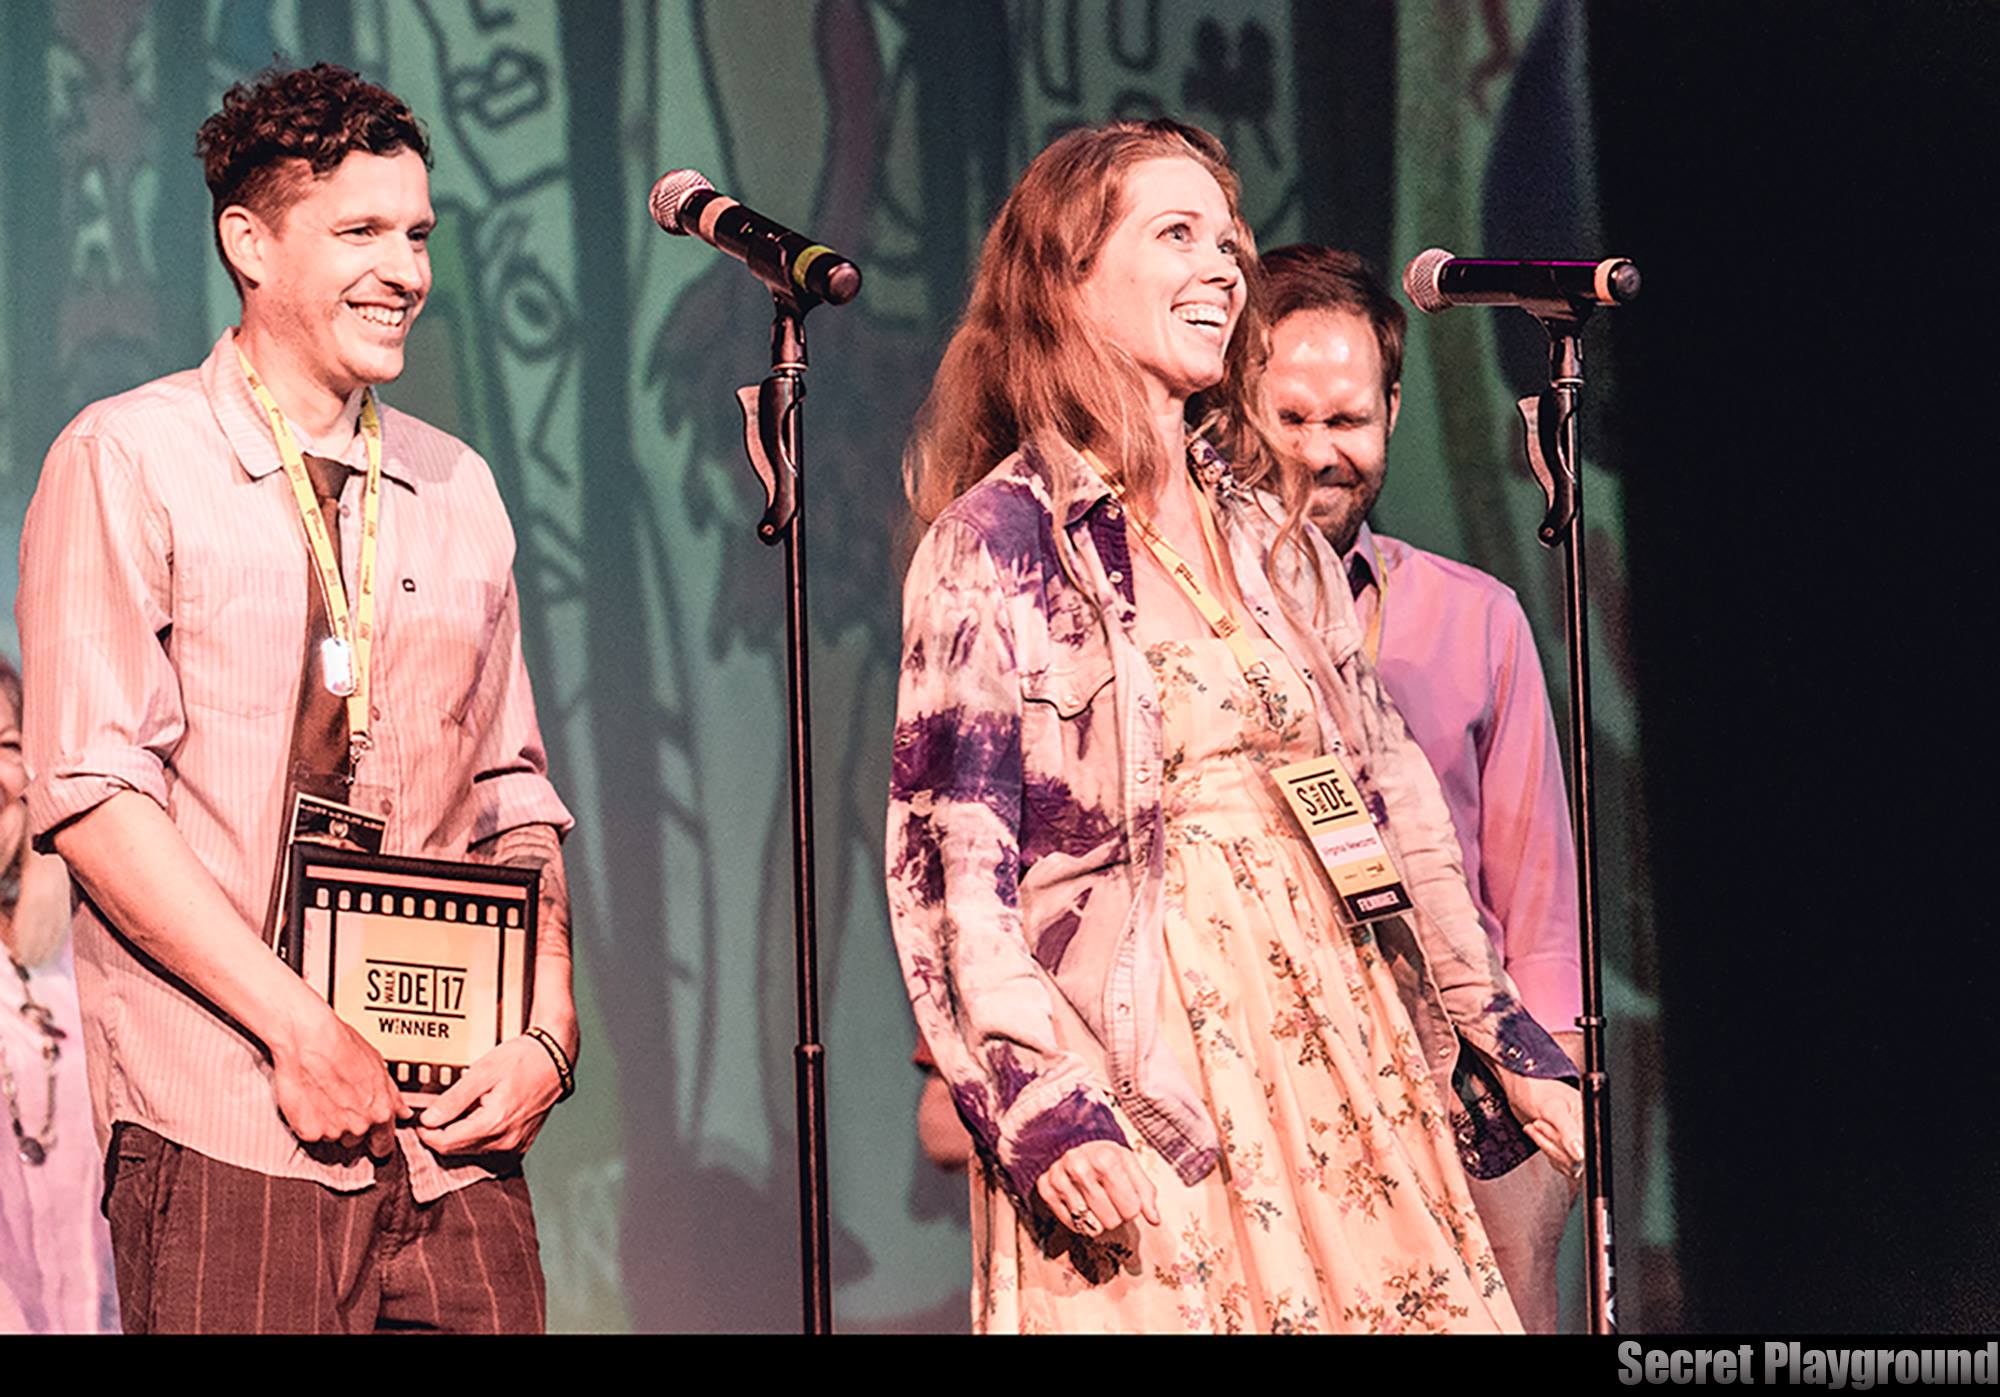 (left to right) Paul D. Hart, Virginia Newcomb & Ben Umstead accepting the Kathryn Tucker Windham Storytelling Jury Award at Sidewalk Film Festival